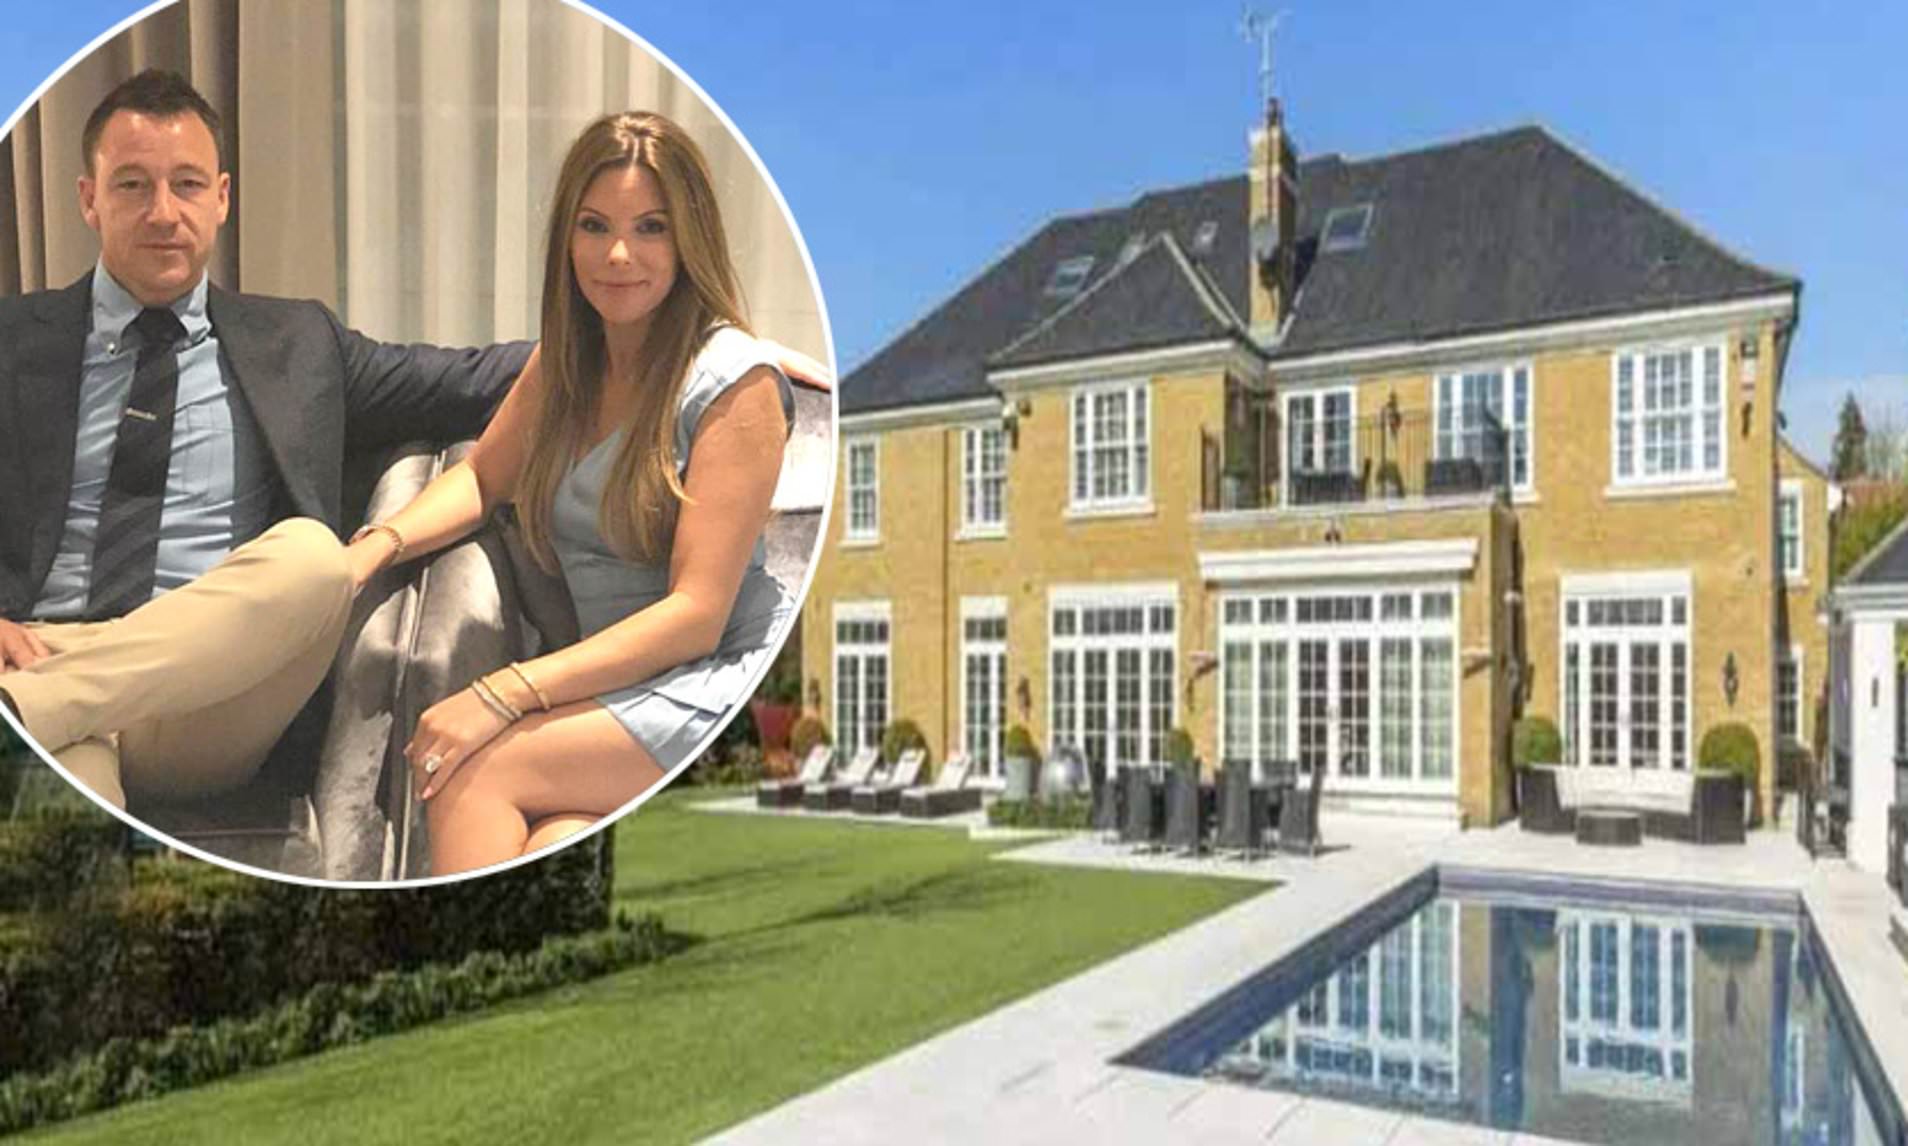 John Terry to sell his £5.5m mansion as wife is still traumatized by 2017 burglary